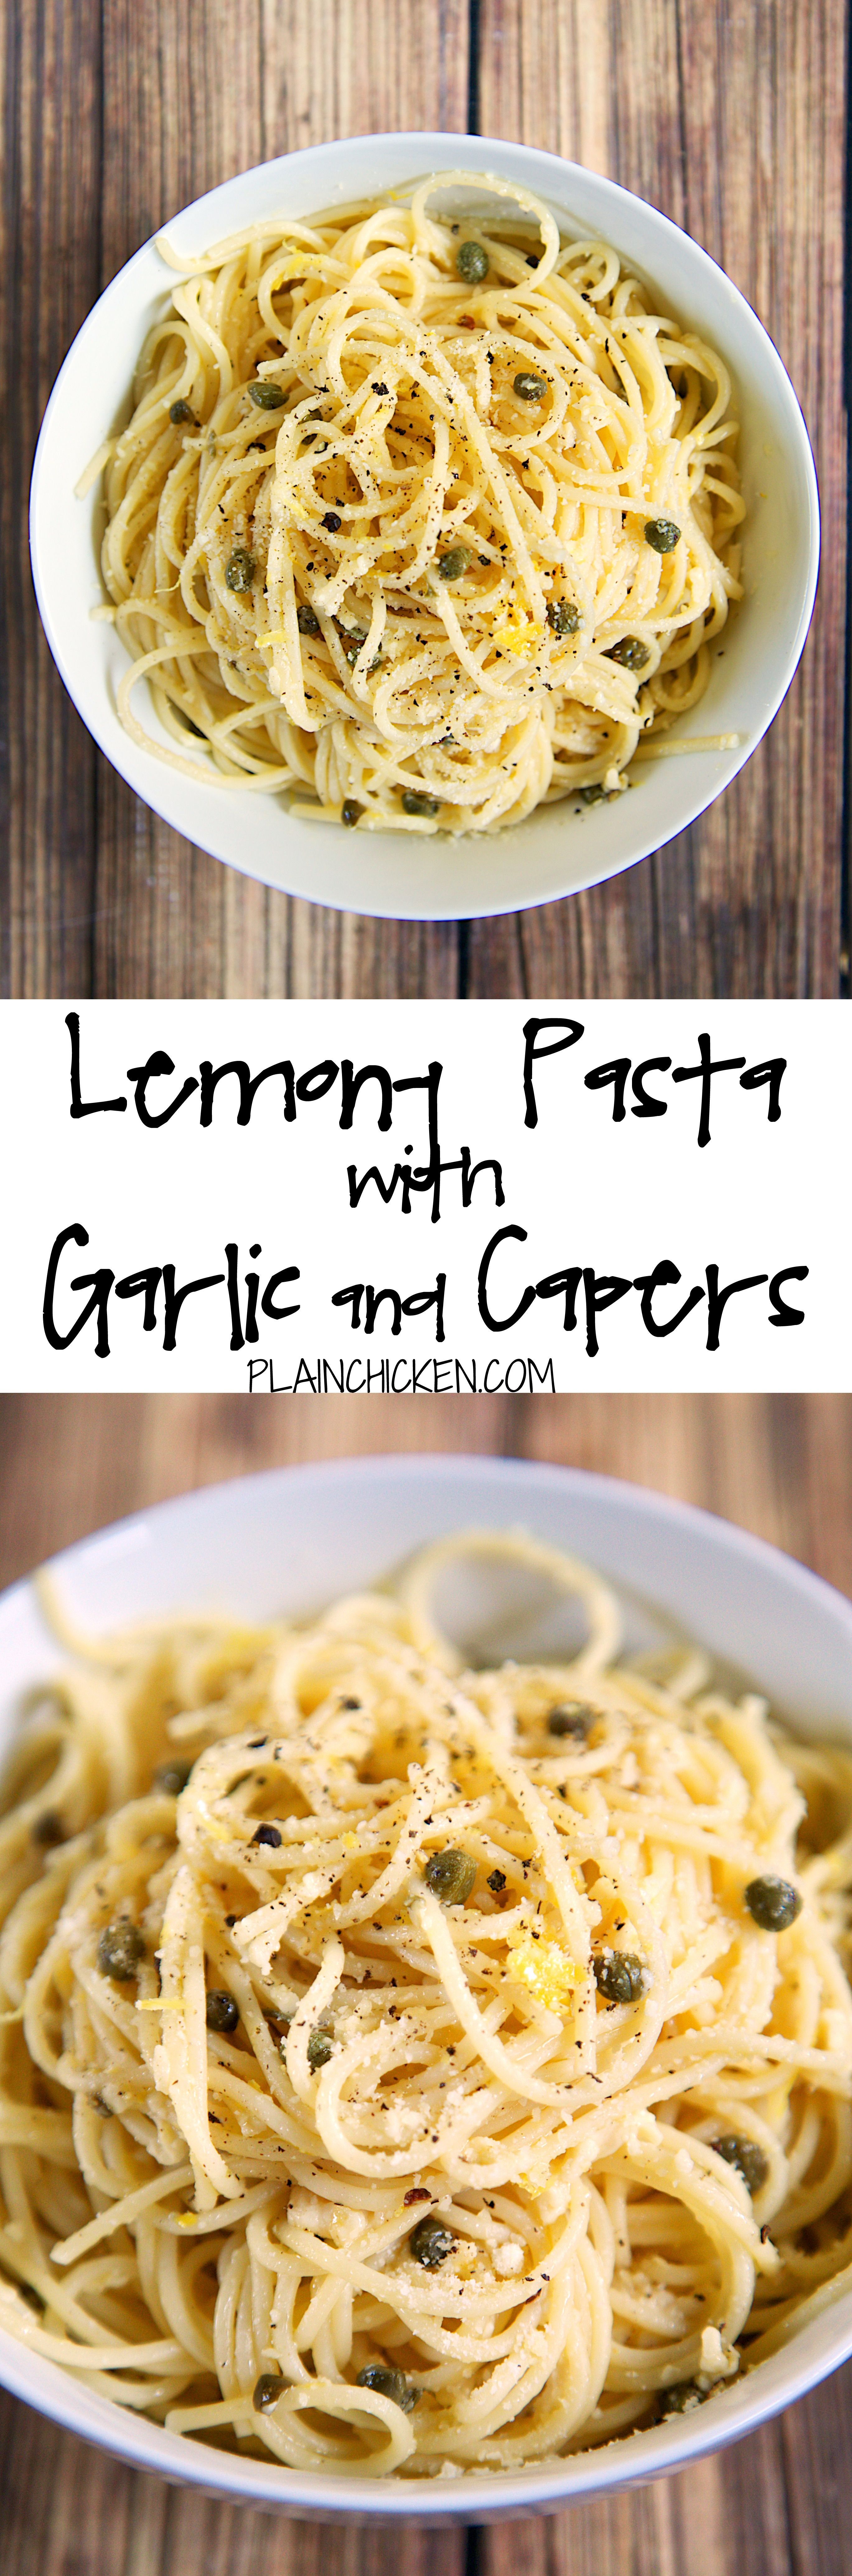 Lemony Pasta with Garlic and Capers recipe – quick pasta dish tossed with olive oil, lemon, garlic, capers and parmesan –